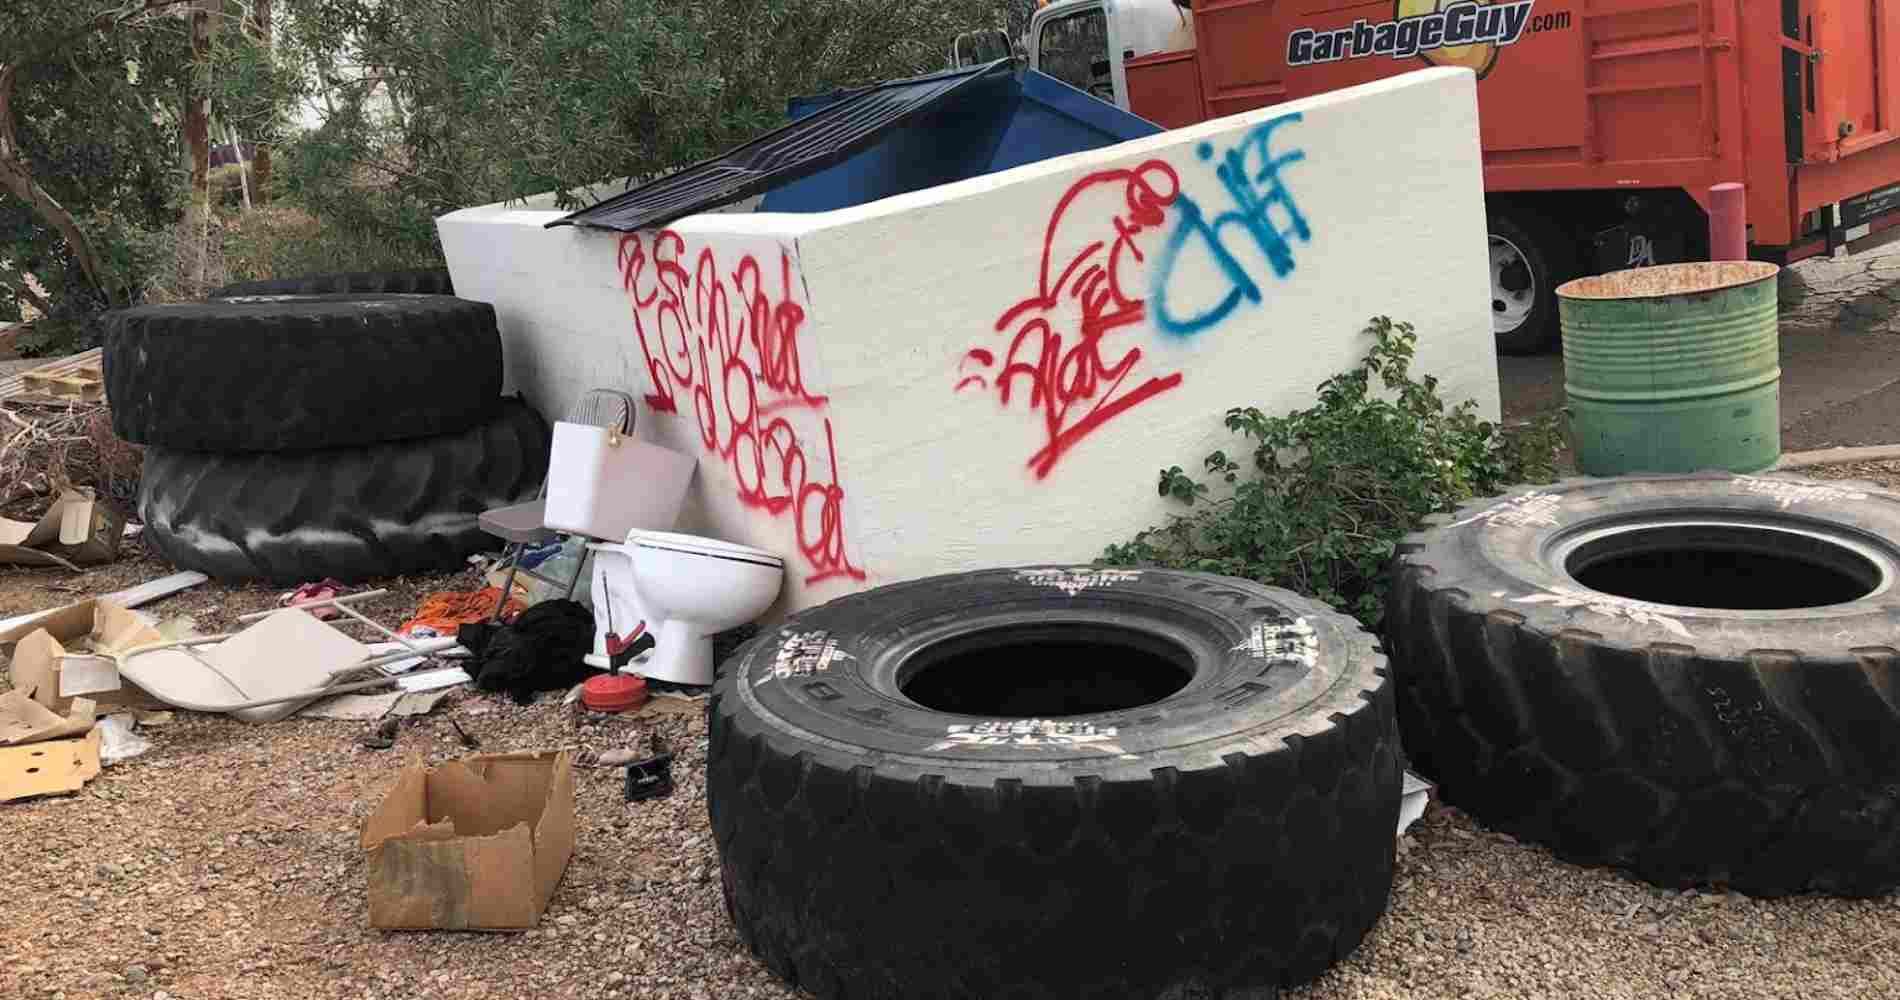 #1 for Tire Disposal in Chandler, AZ with Over 1200 5-Star Reviews!